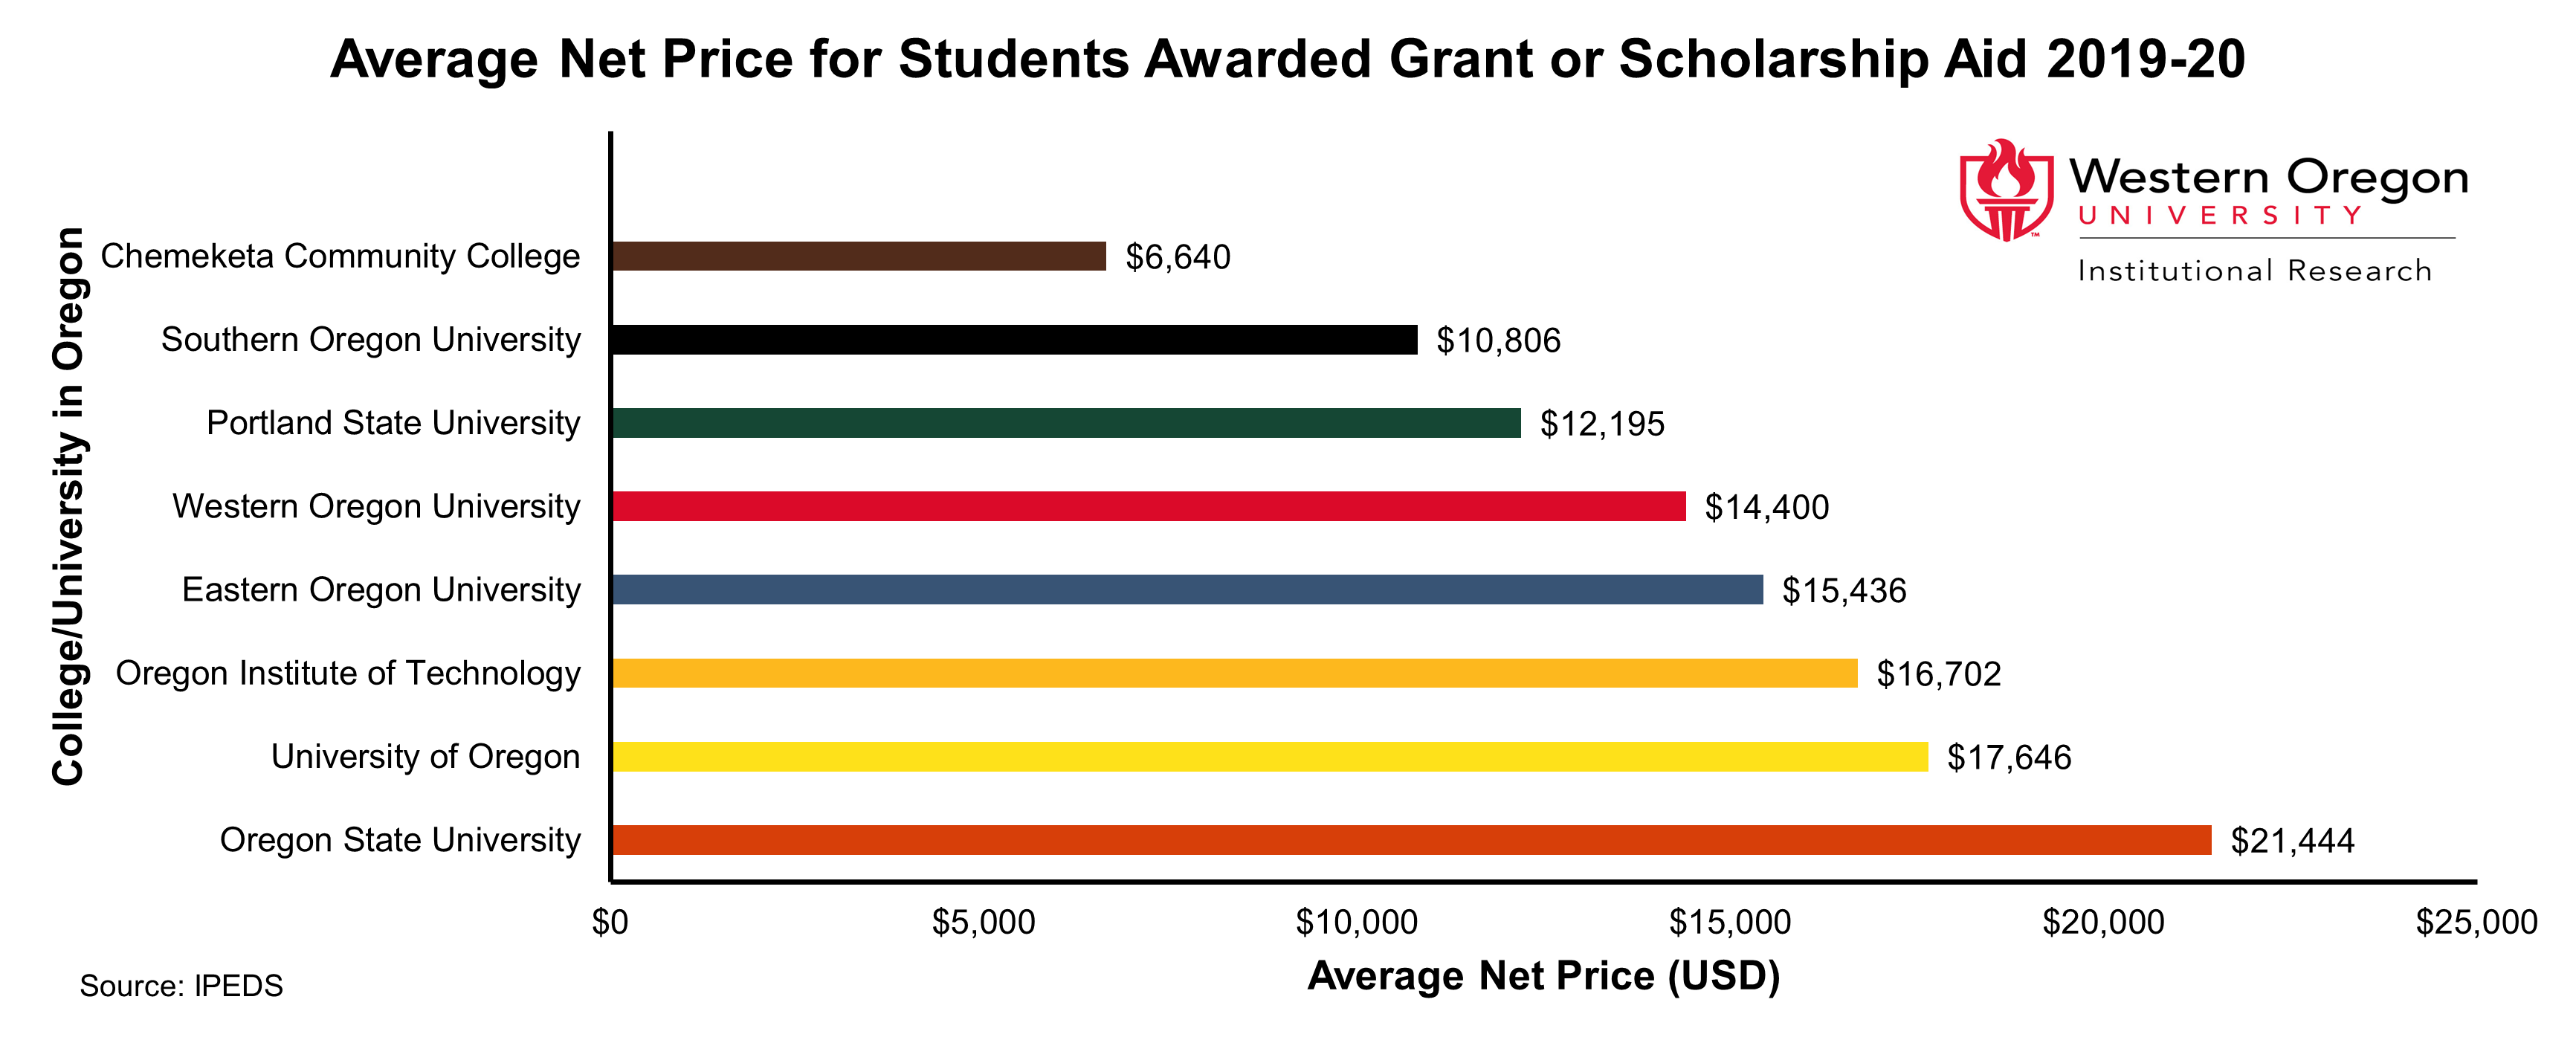 Bar graph of average net price for students awarded grant or scholarship aid at WOU and Other Public Universities in the 2019-2020 school year, showing that WOU is near the median on average net price